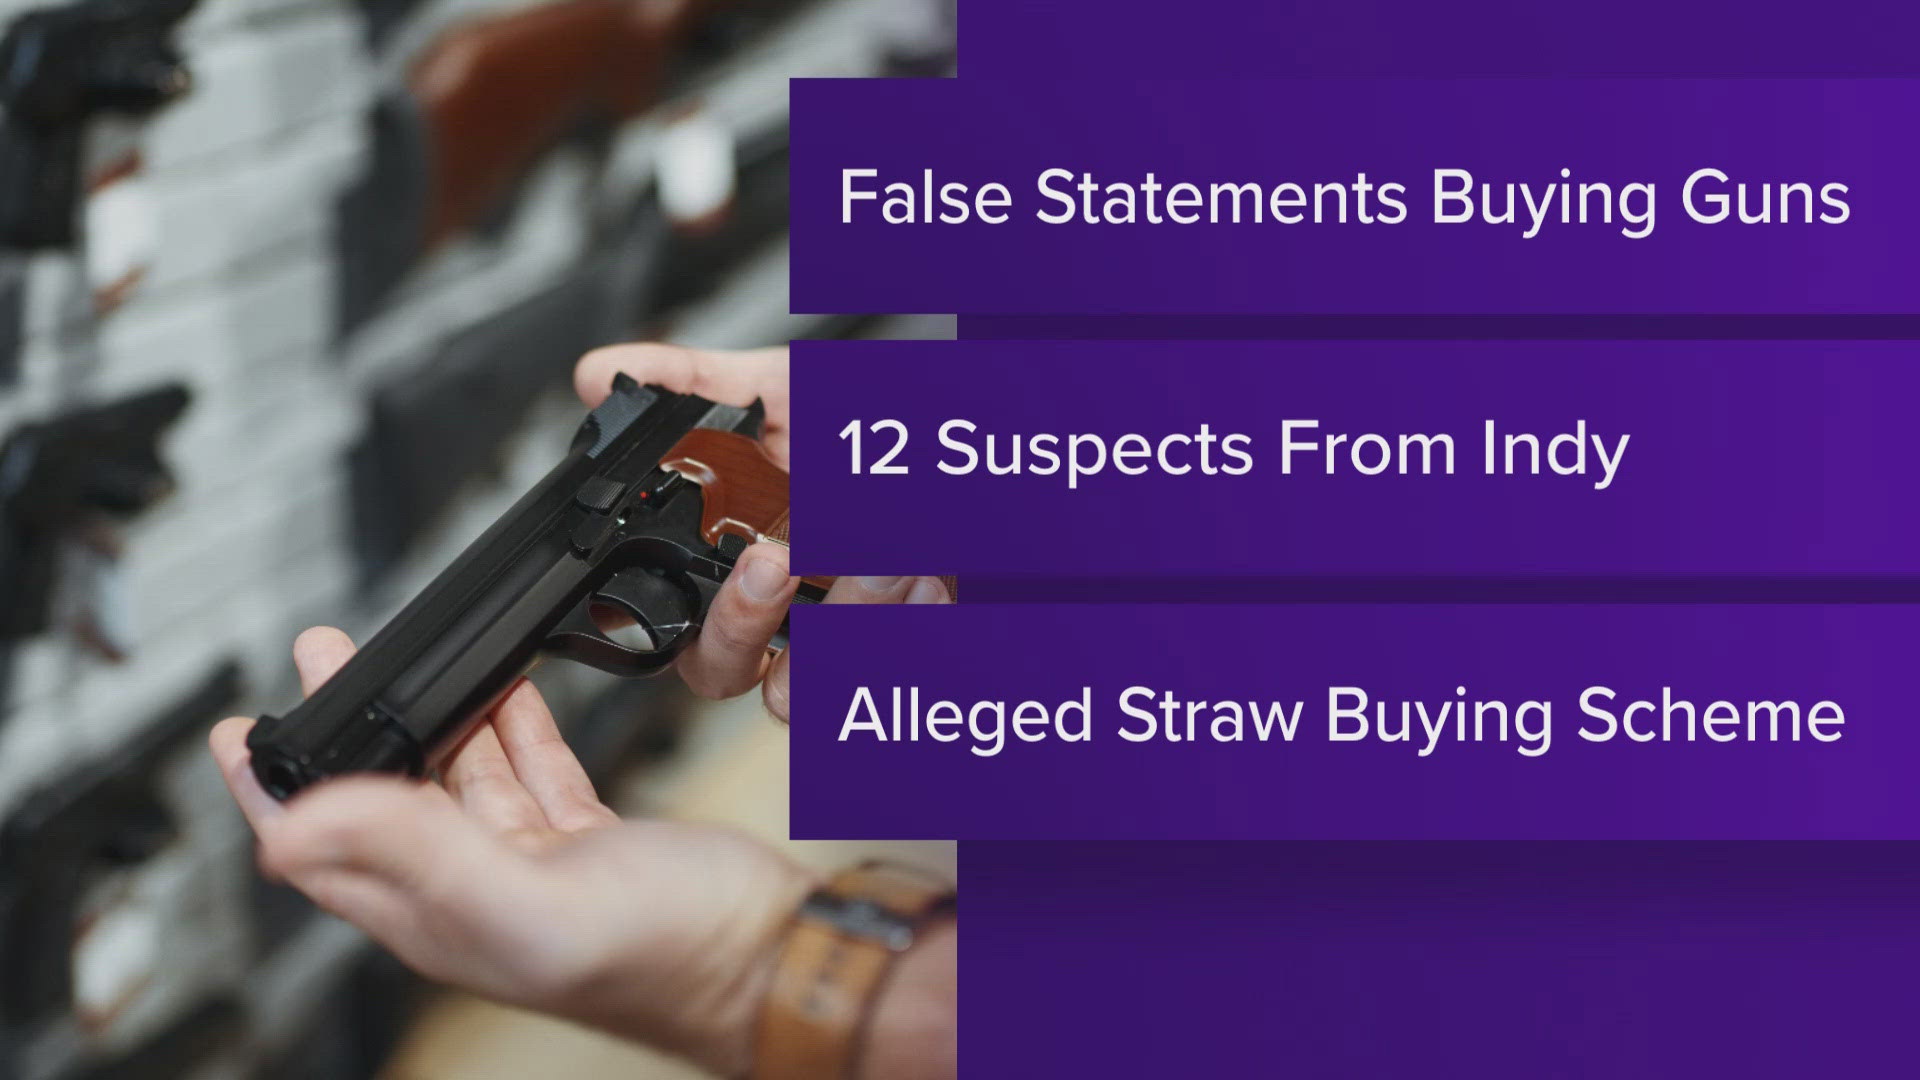 Prosecutors say the suspects were straw buyers to get guns to people who could not legally buy them.